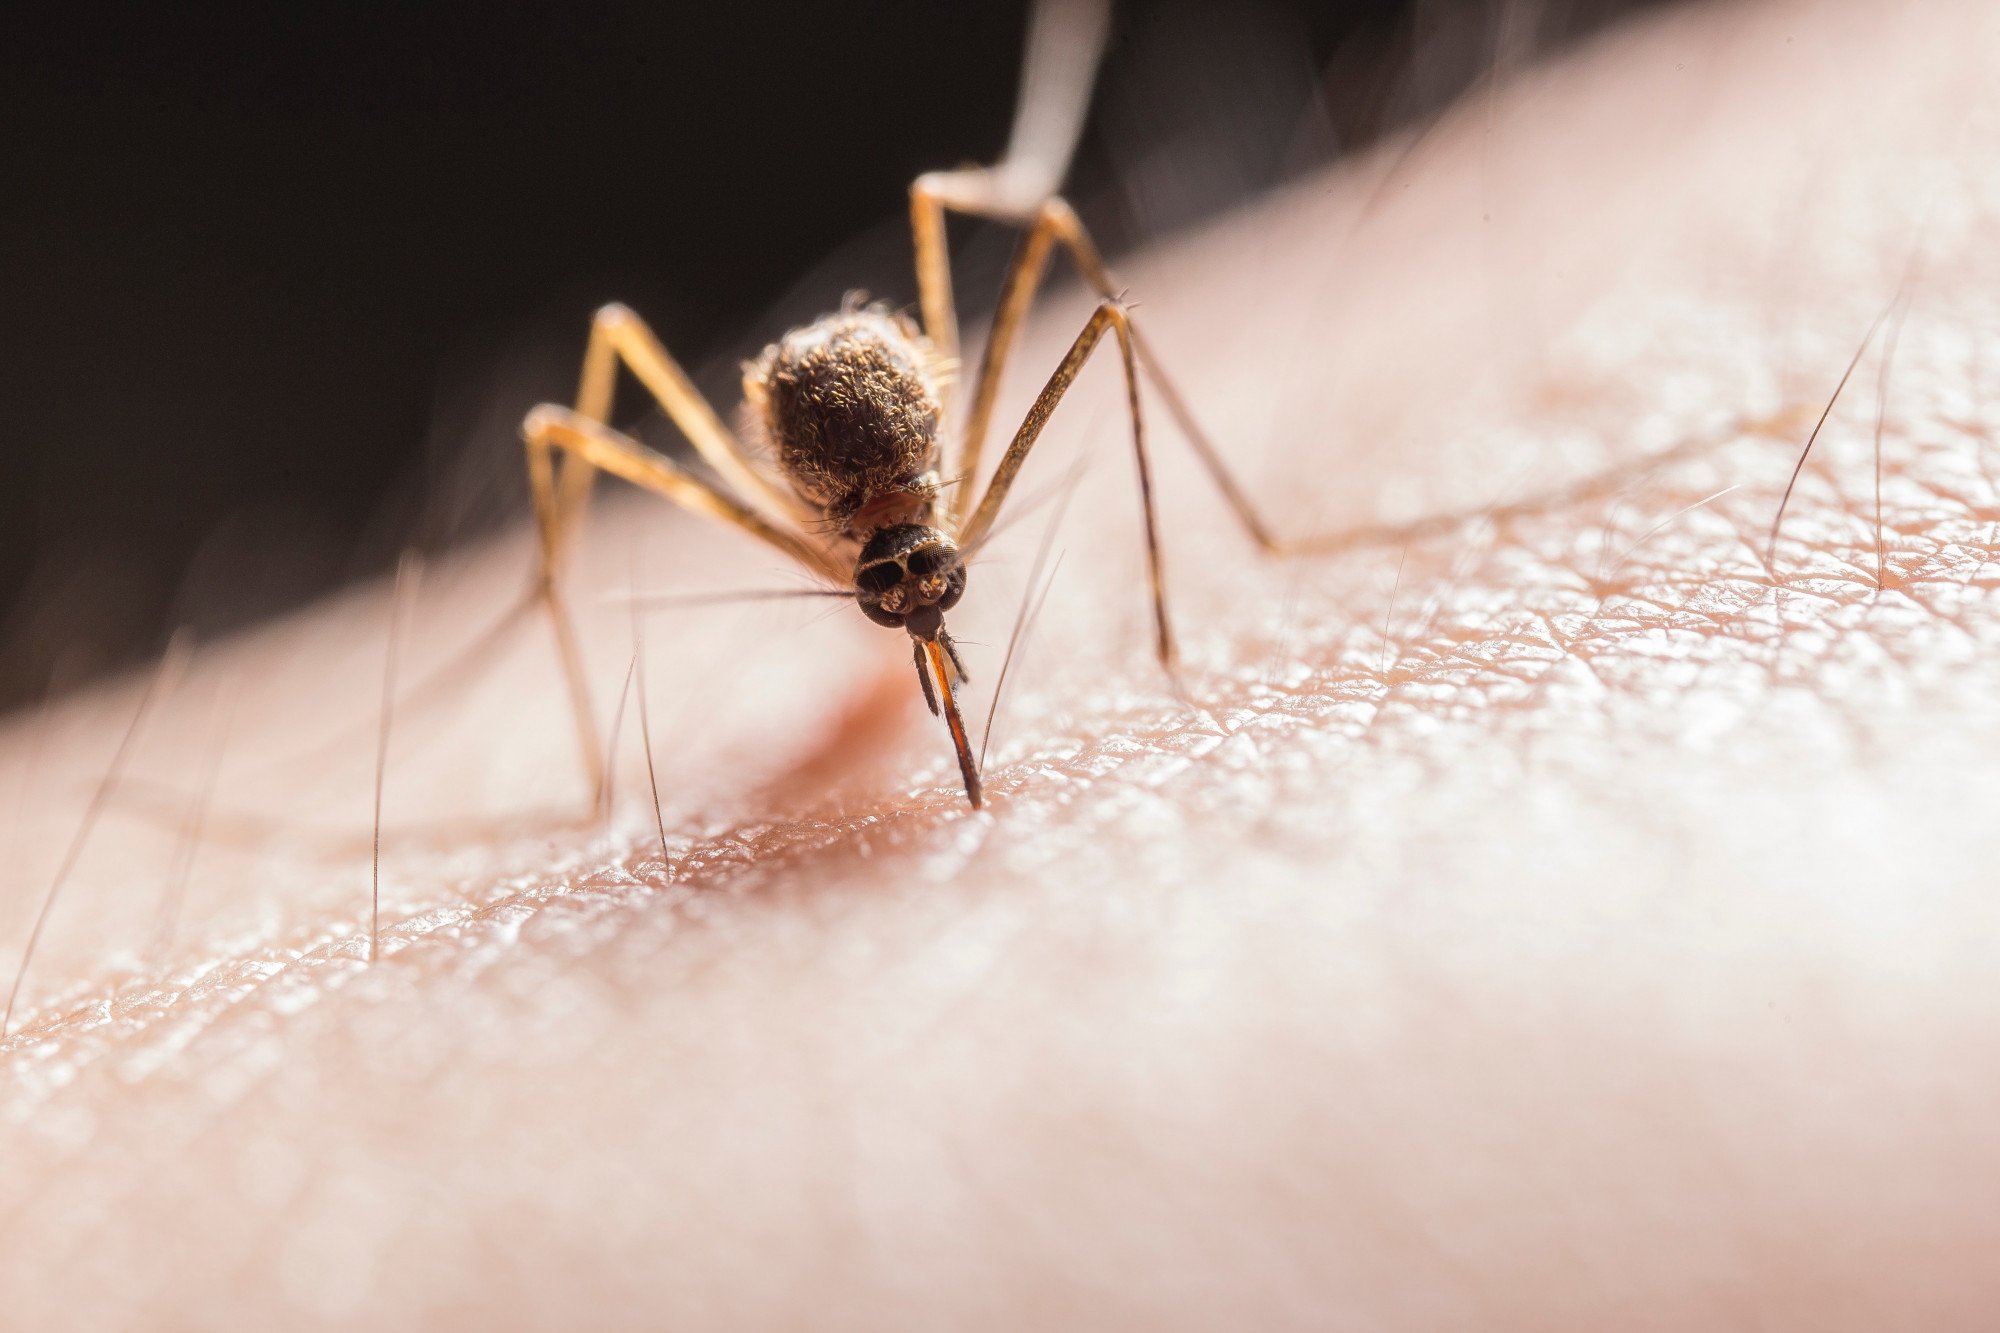 mosquito sitting on skin of a person